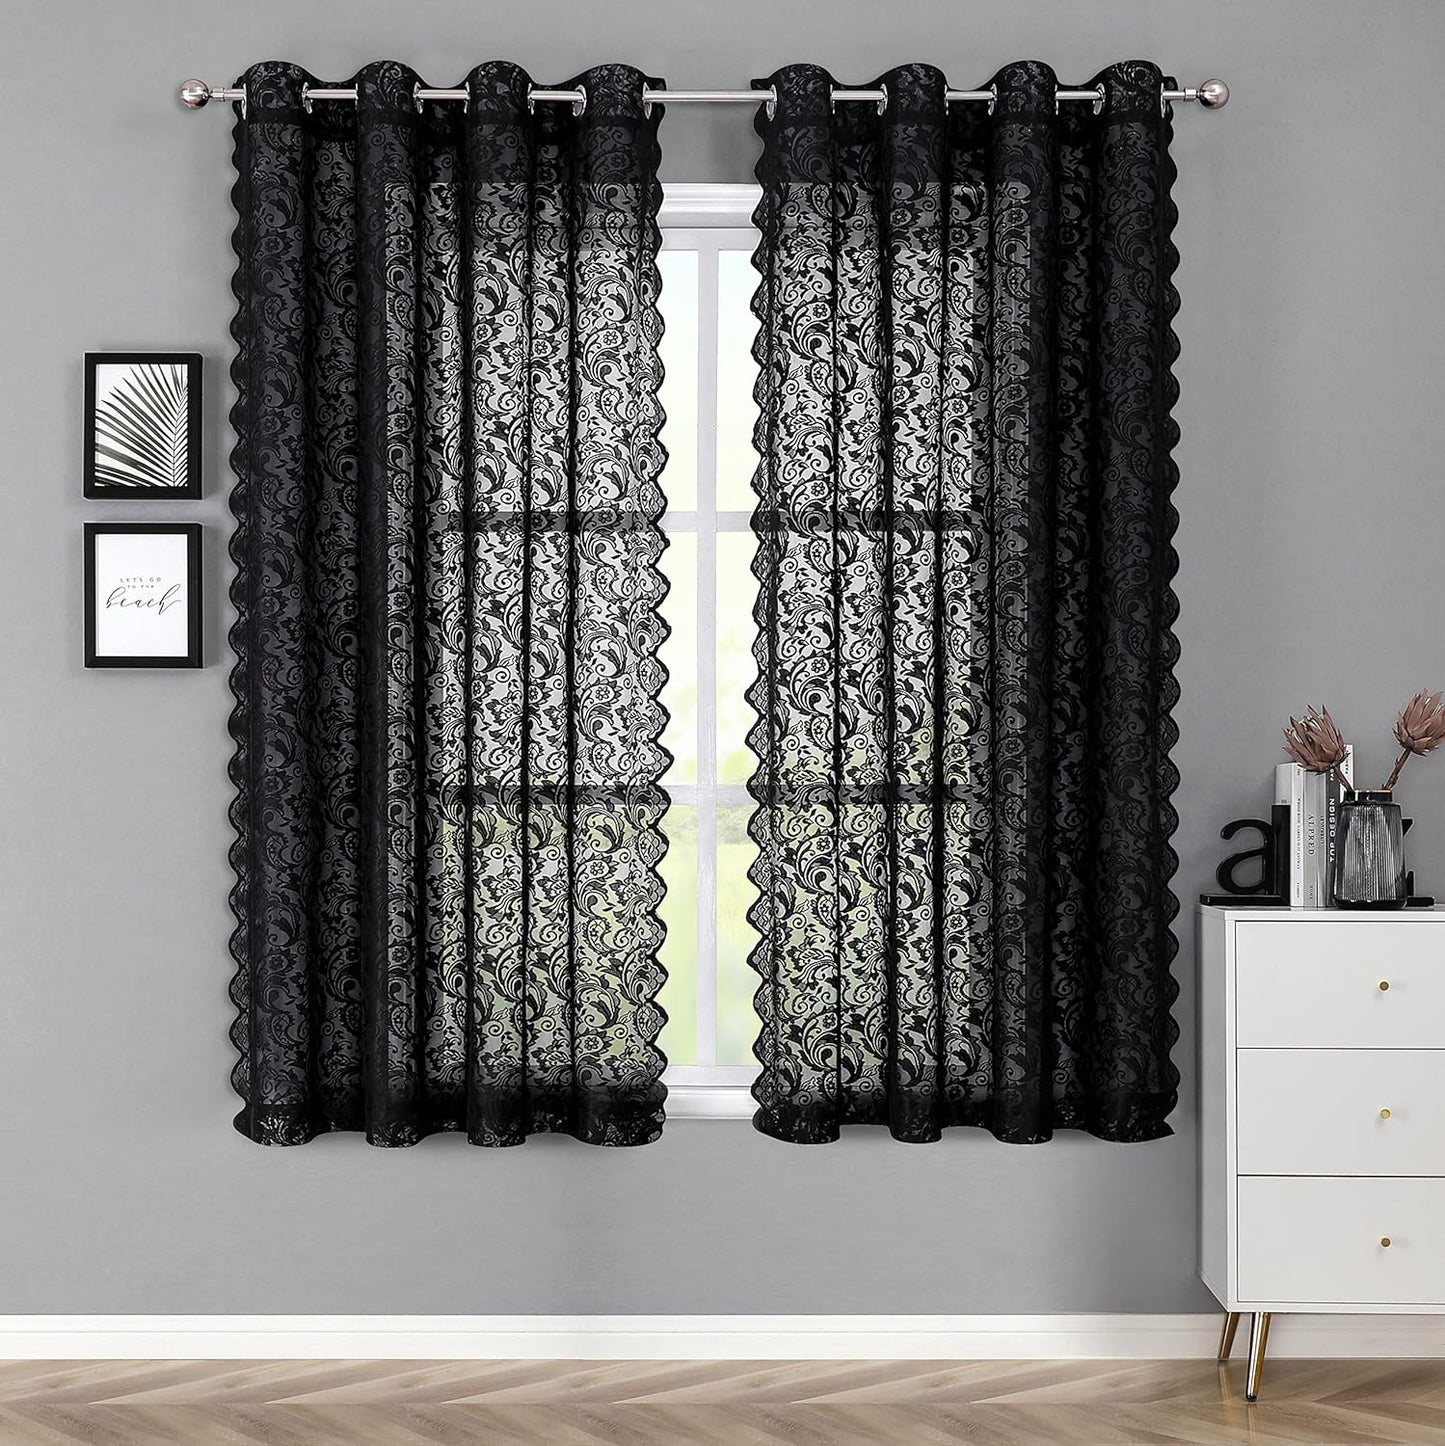 Black Sheer Lace Curtains 84 Inch Vintage Floral Sheer Gothic Curtain Panels for Living Room Bedroom Luxury Light Filtering Drapes Black Window Treatment Sets Rod Pocket 2 Panels 54" Wx84 L  Bujasso Grommet Black 54"X54"X2 